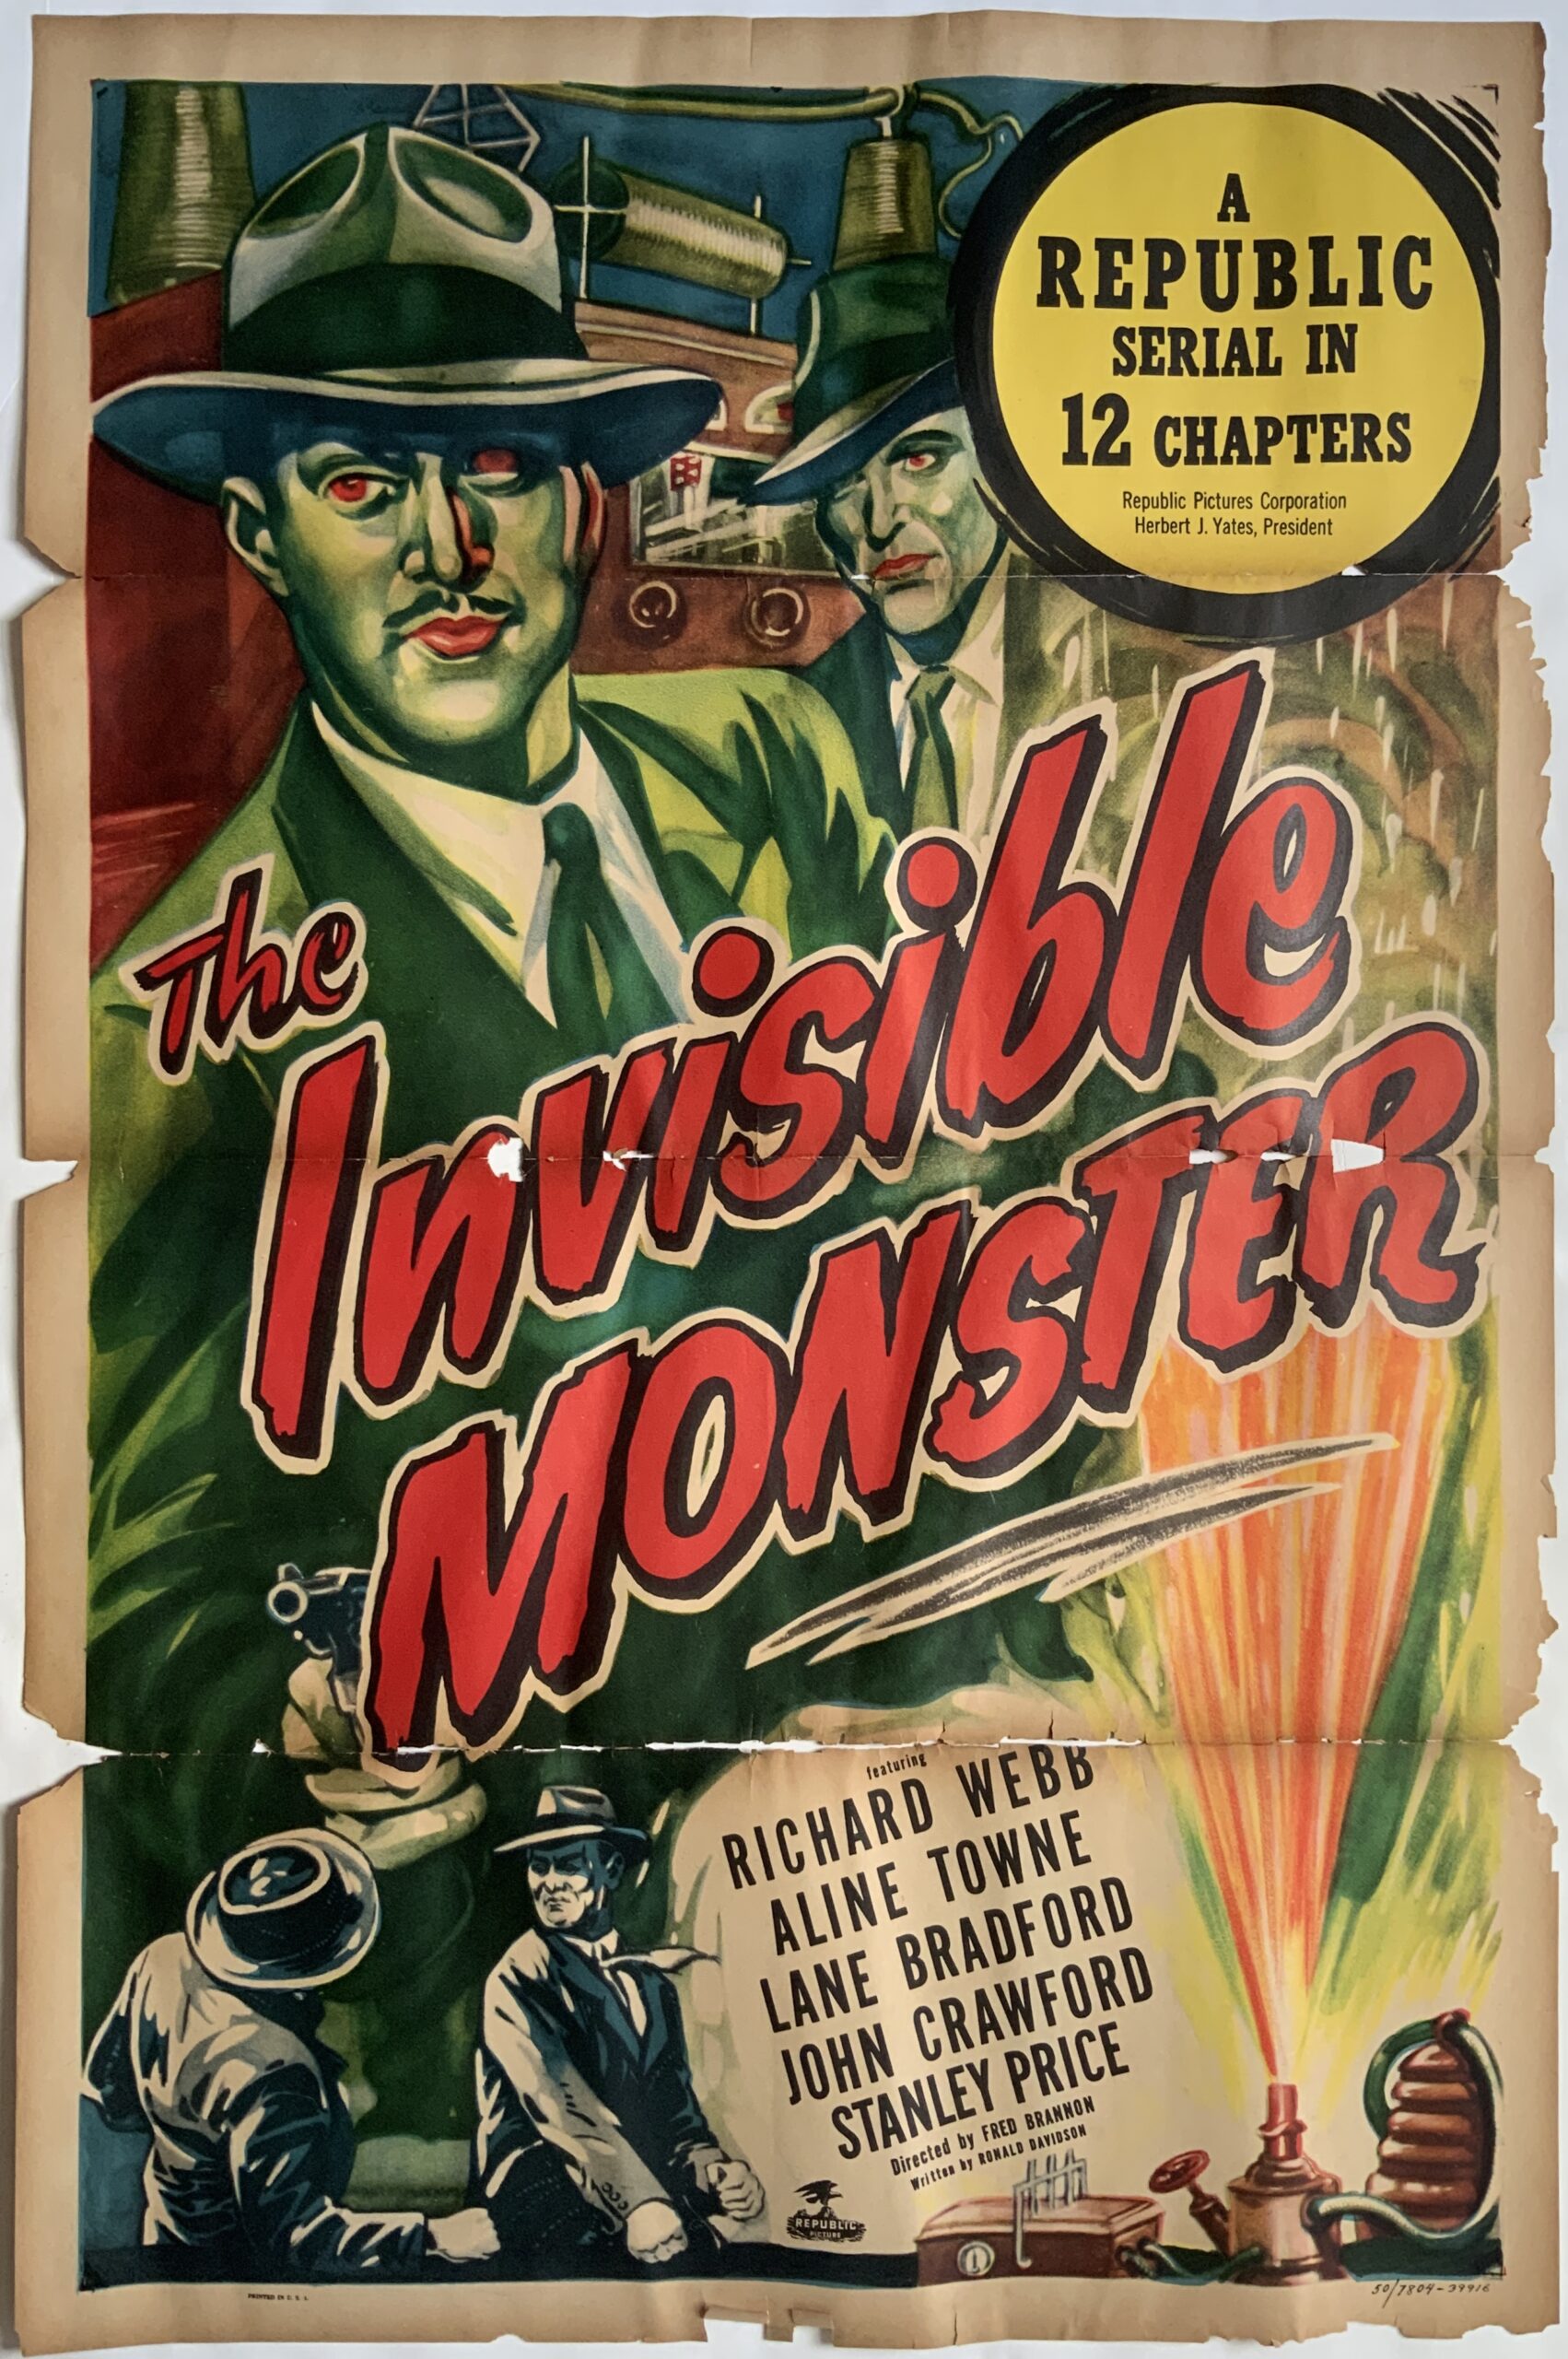 M604	THE INVISIBLE MONSTER ORIGINAL 1950 VINTAGE POSTER - 27x41”